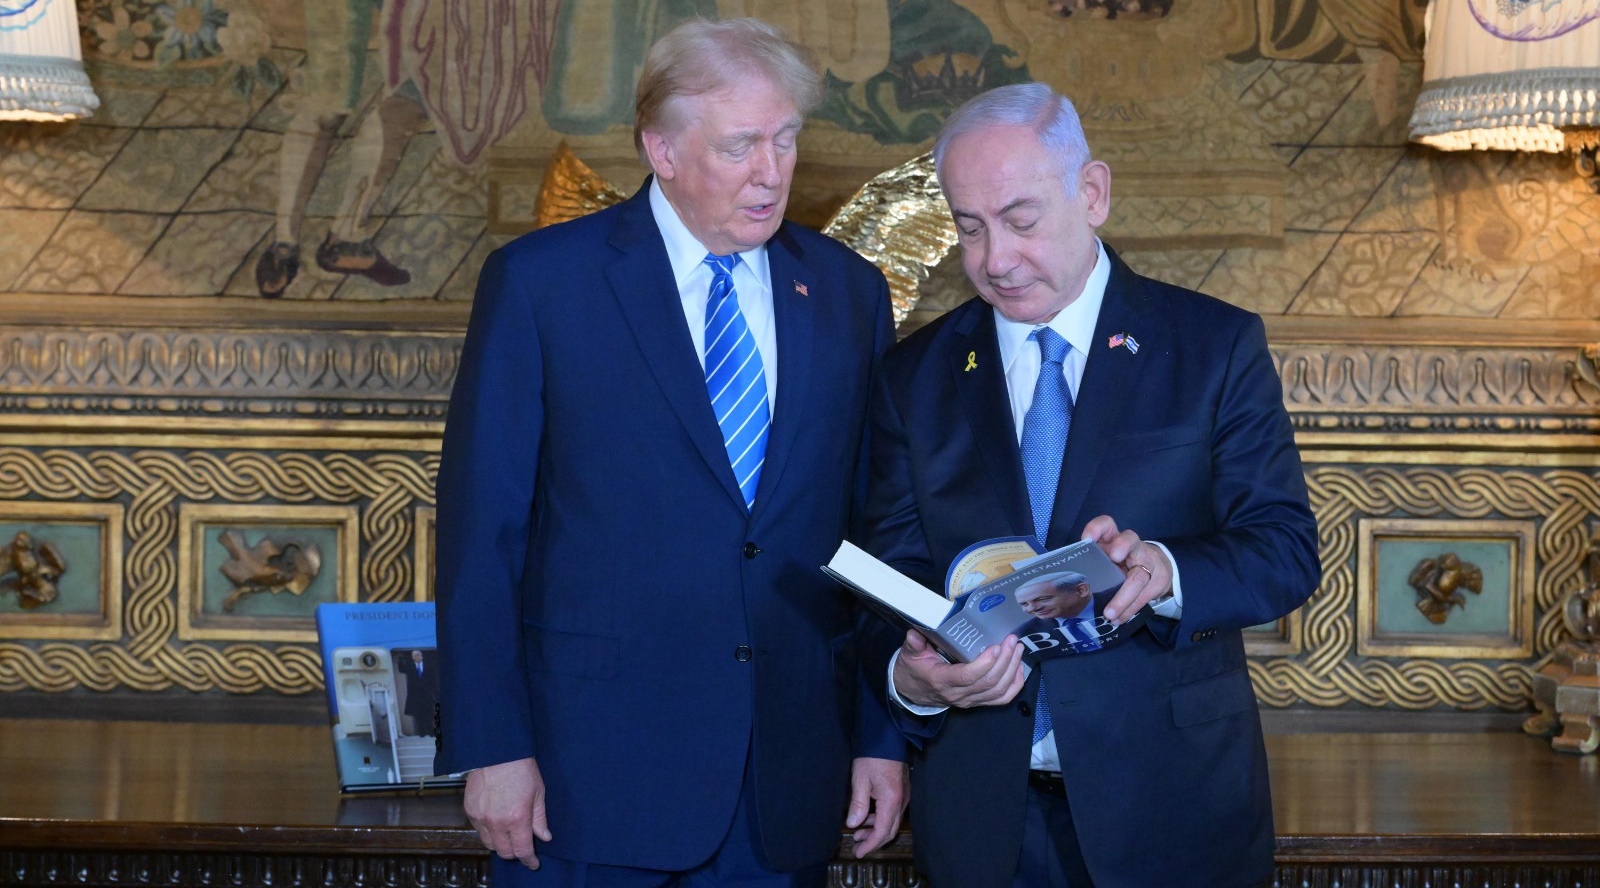 Trump, meeting with Netanyahu, says we are ‘close’ to World War III because of Biden